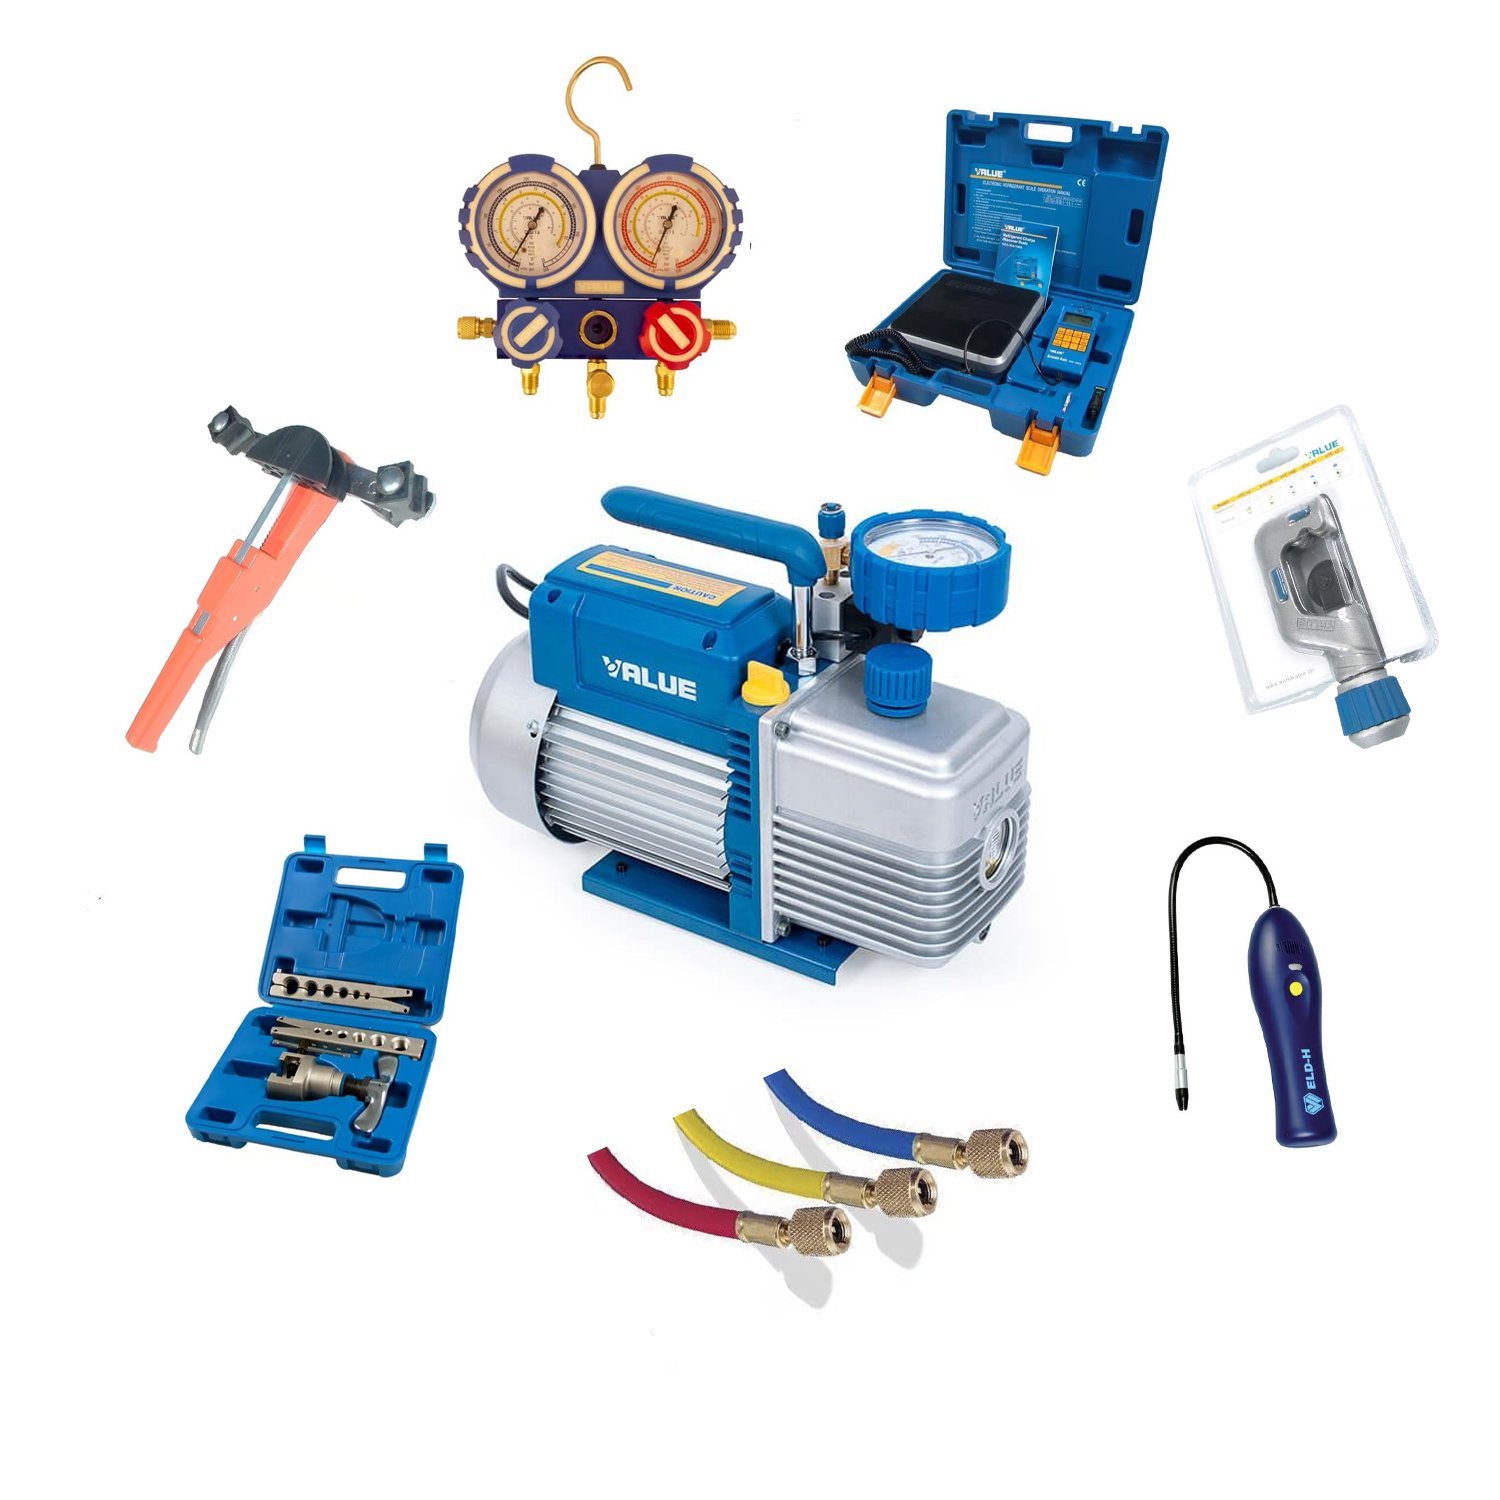 Basic tool set for A1-A2L (vacuum pump, leak detector, fitter's aid, filling hoses, scales, pipe bender, pipe cutter and flaring device)